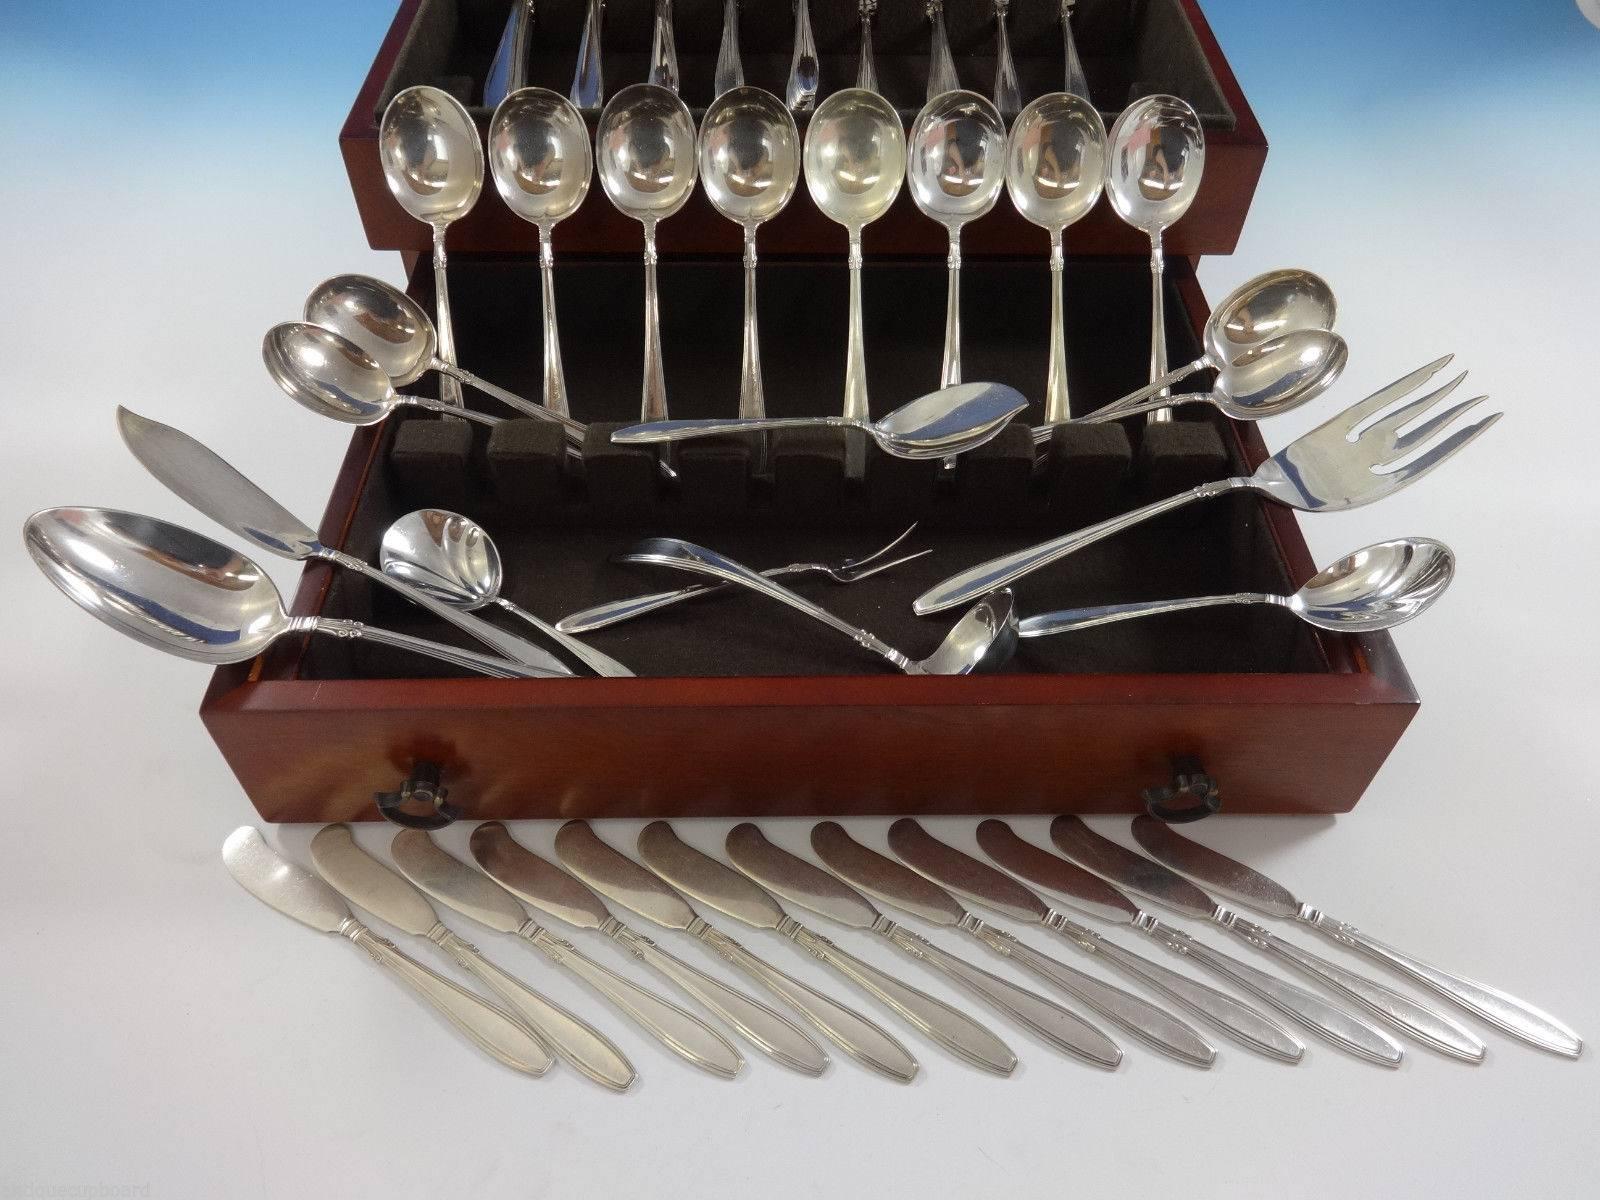 Large nocturne by Gorham sterling silver flatware set, 93 pieces. This pattern has an simple, Art Deco, linear design. 

This set includes:
12 knives, 9